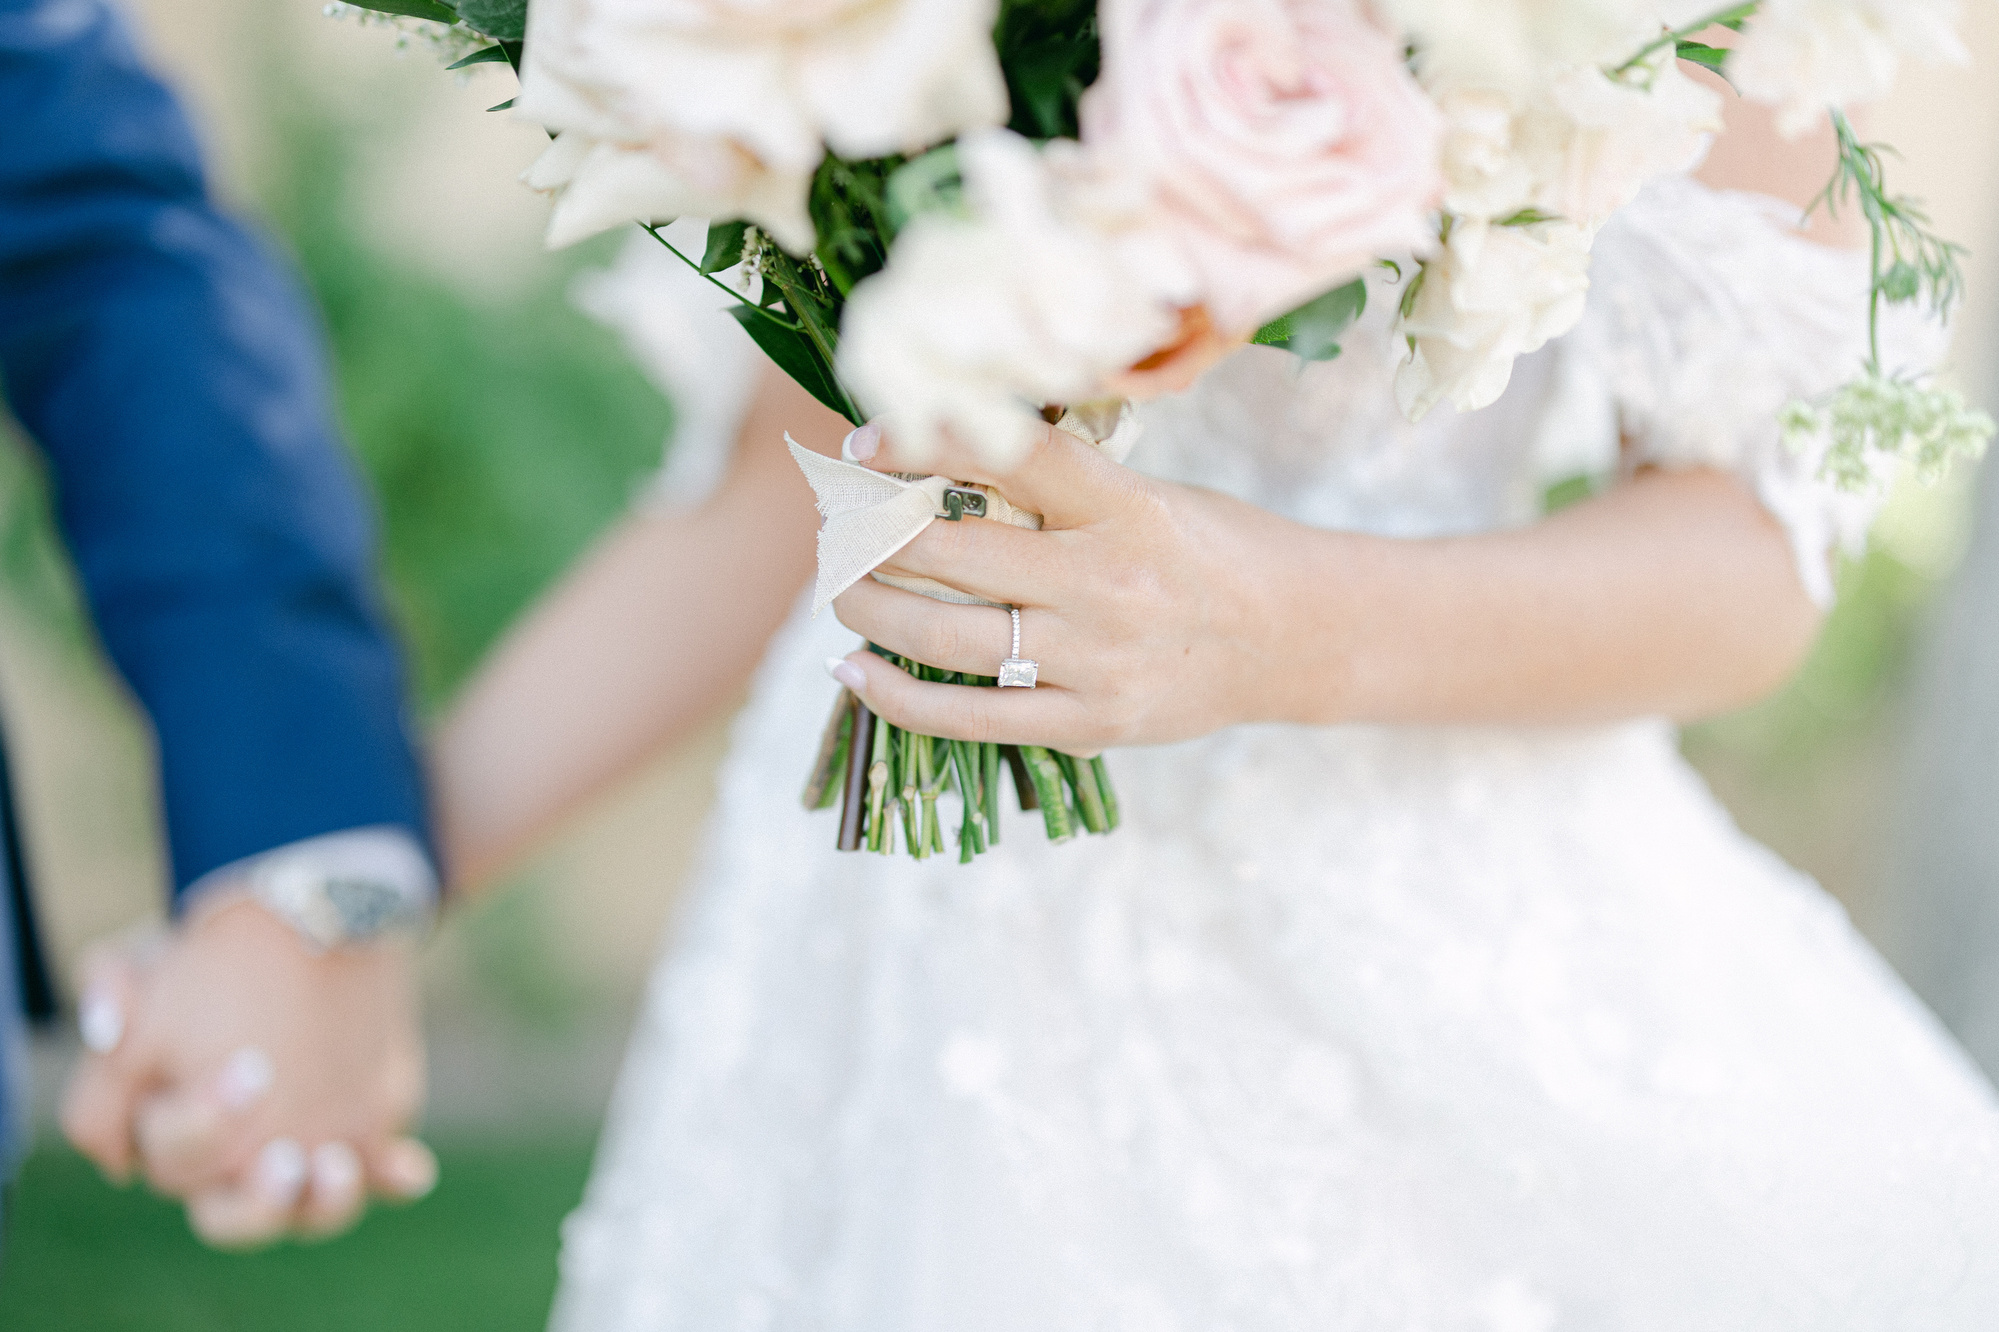 A bride on her wedding day holding her bouquet and displaying her engagement ring